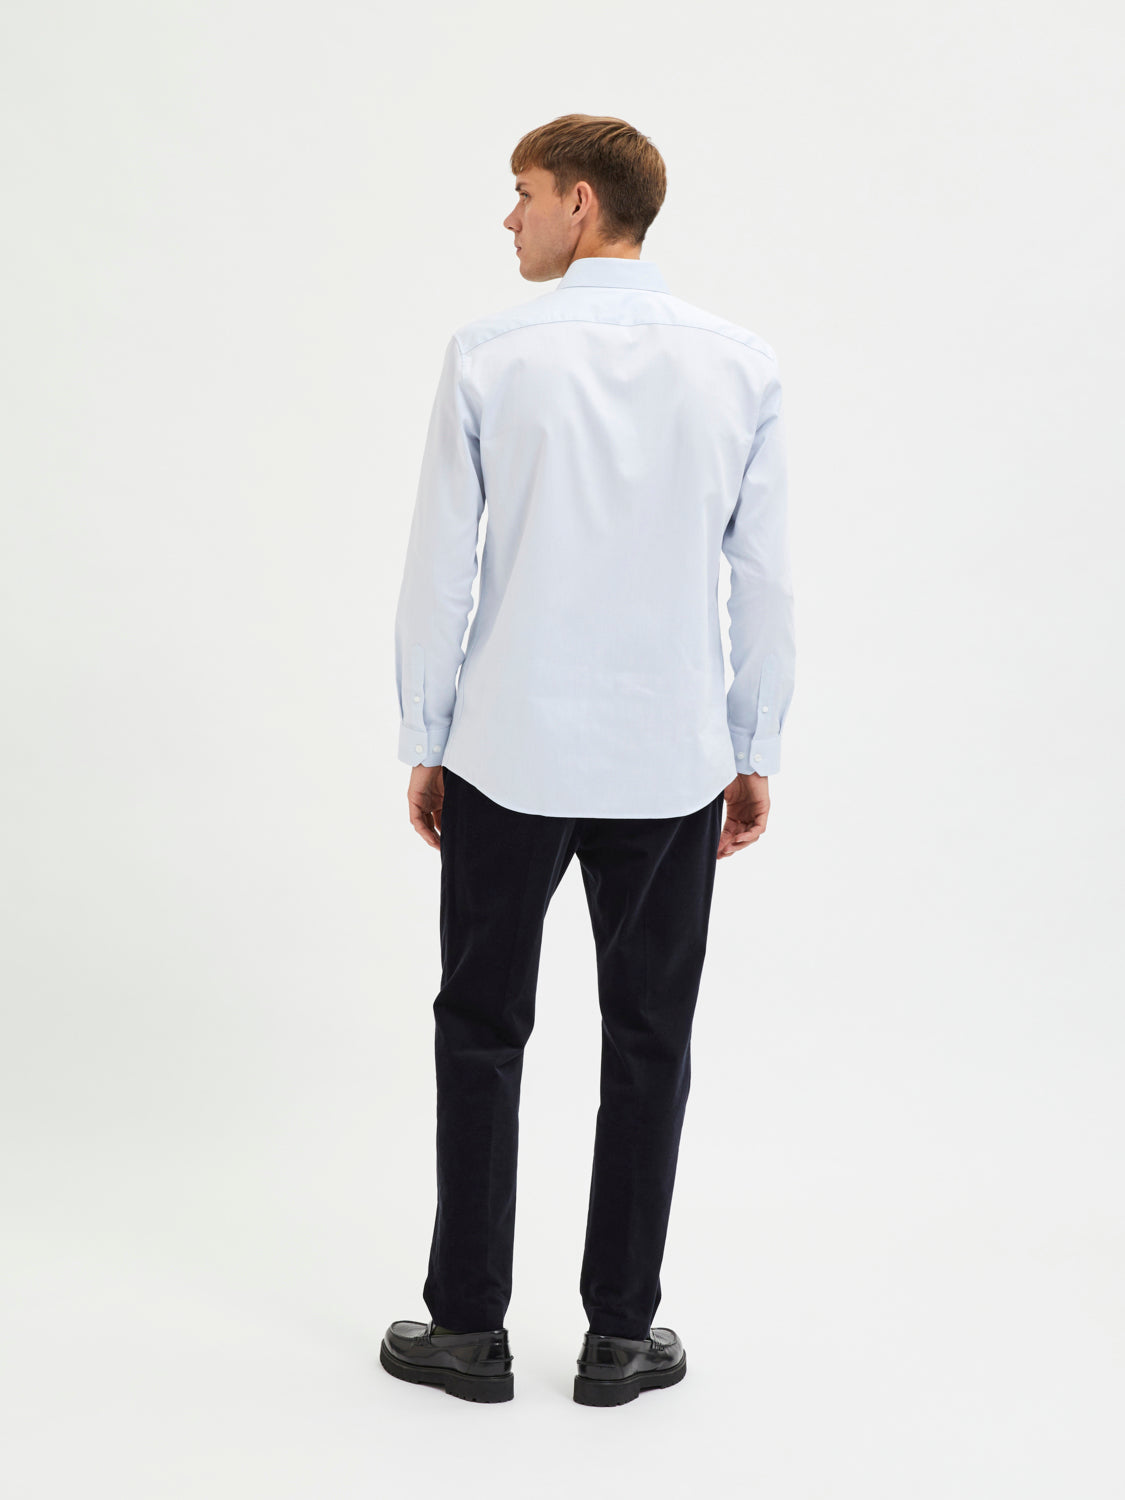 SELECTED HOMME - SLIM NEW-TUX Shirts - Light Blue